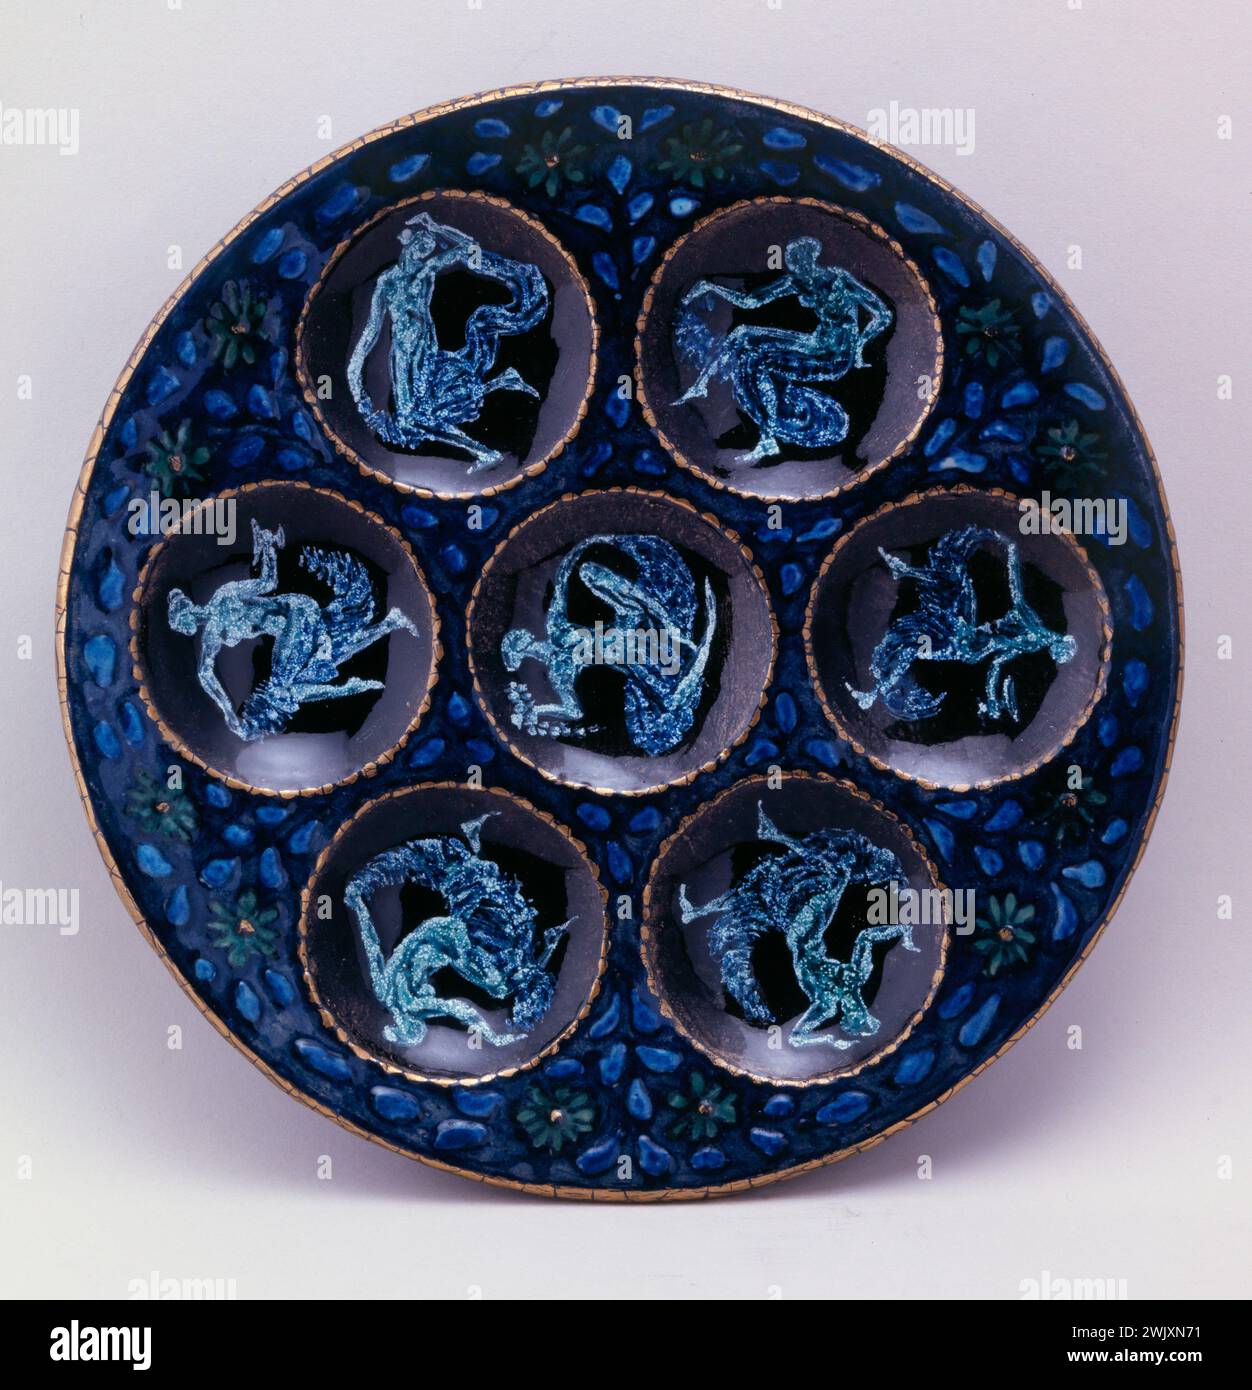 André Metthey (1871-1920). Plate. Earthenware. Museum of Fine Arts of the City of Paris, Petit Palais. 79583-31 Art Menager, Faience, Crockery, XIXth 19th 19th 19 19th 19th century, plate Stock Photo